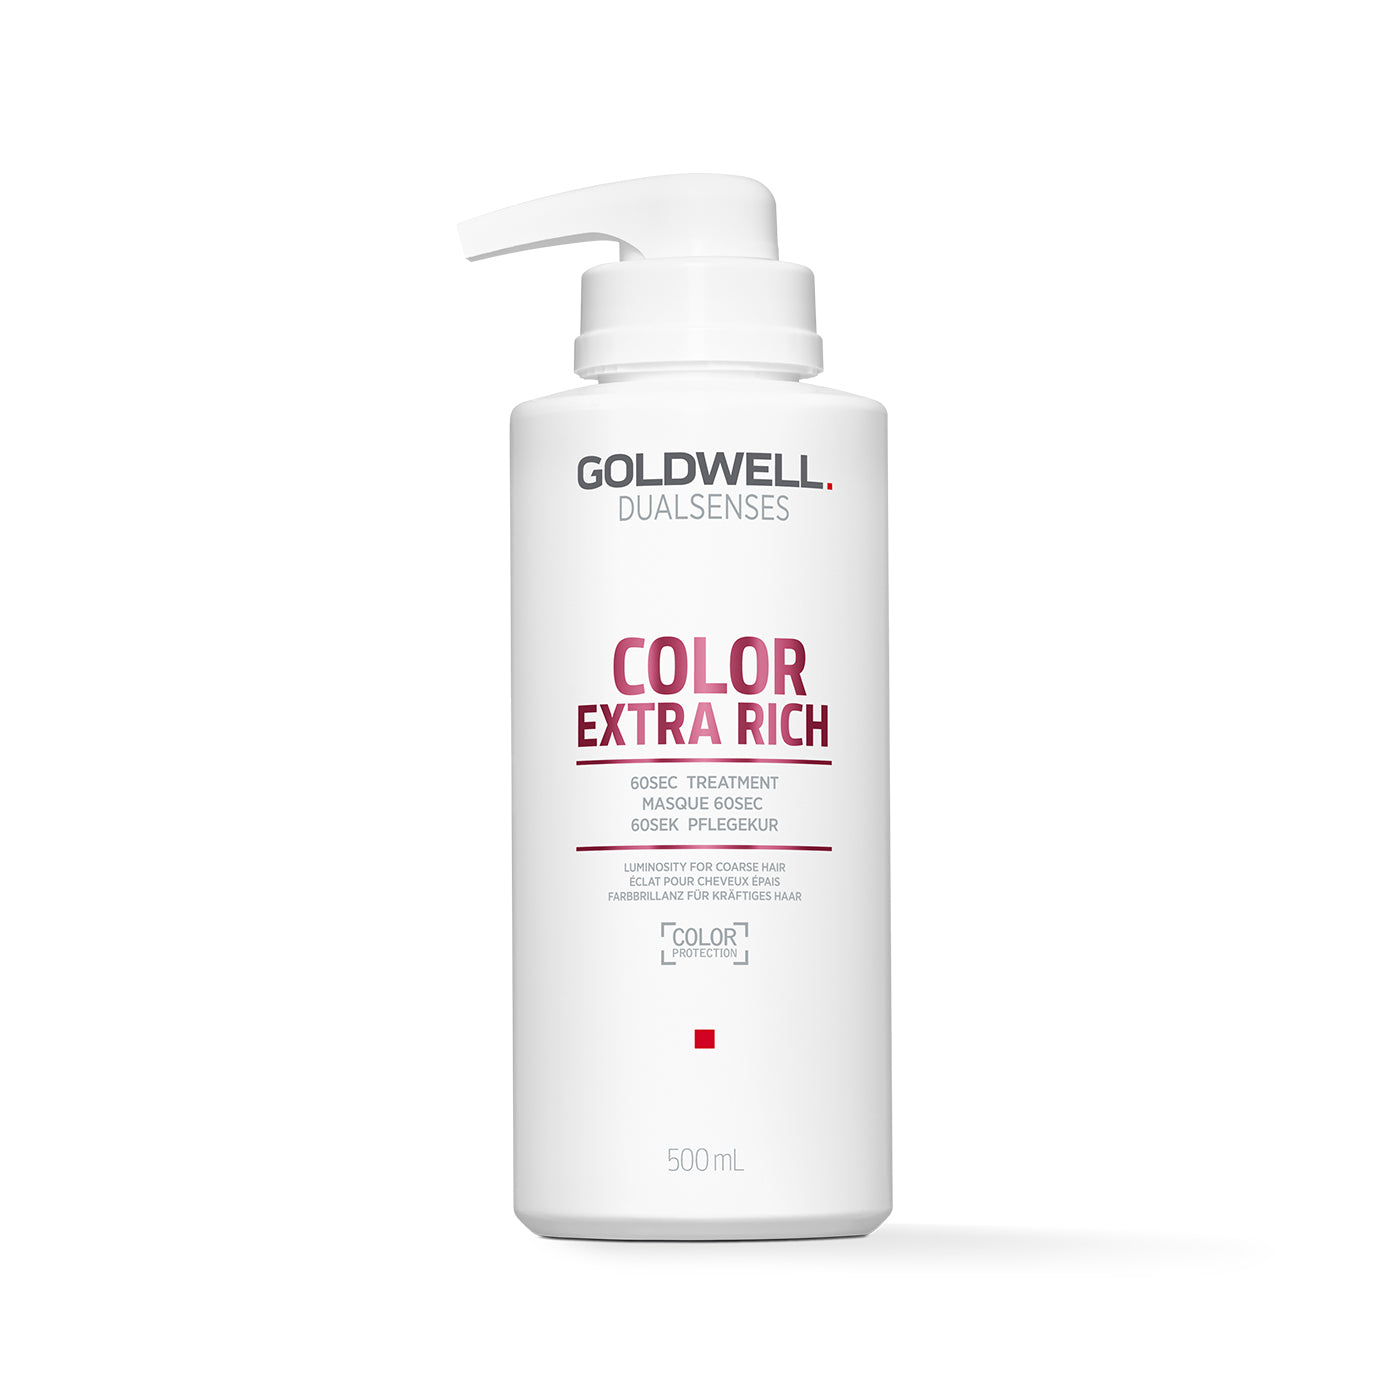 Goldwell DualSenses Color Extra Rich 60 second Treatment (500ml) - Ultimate Hair and Beauty